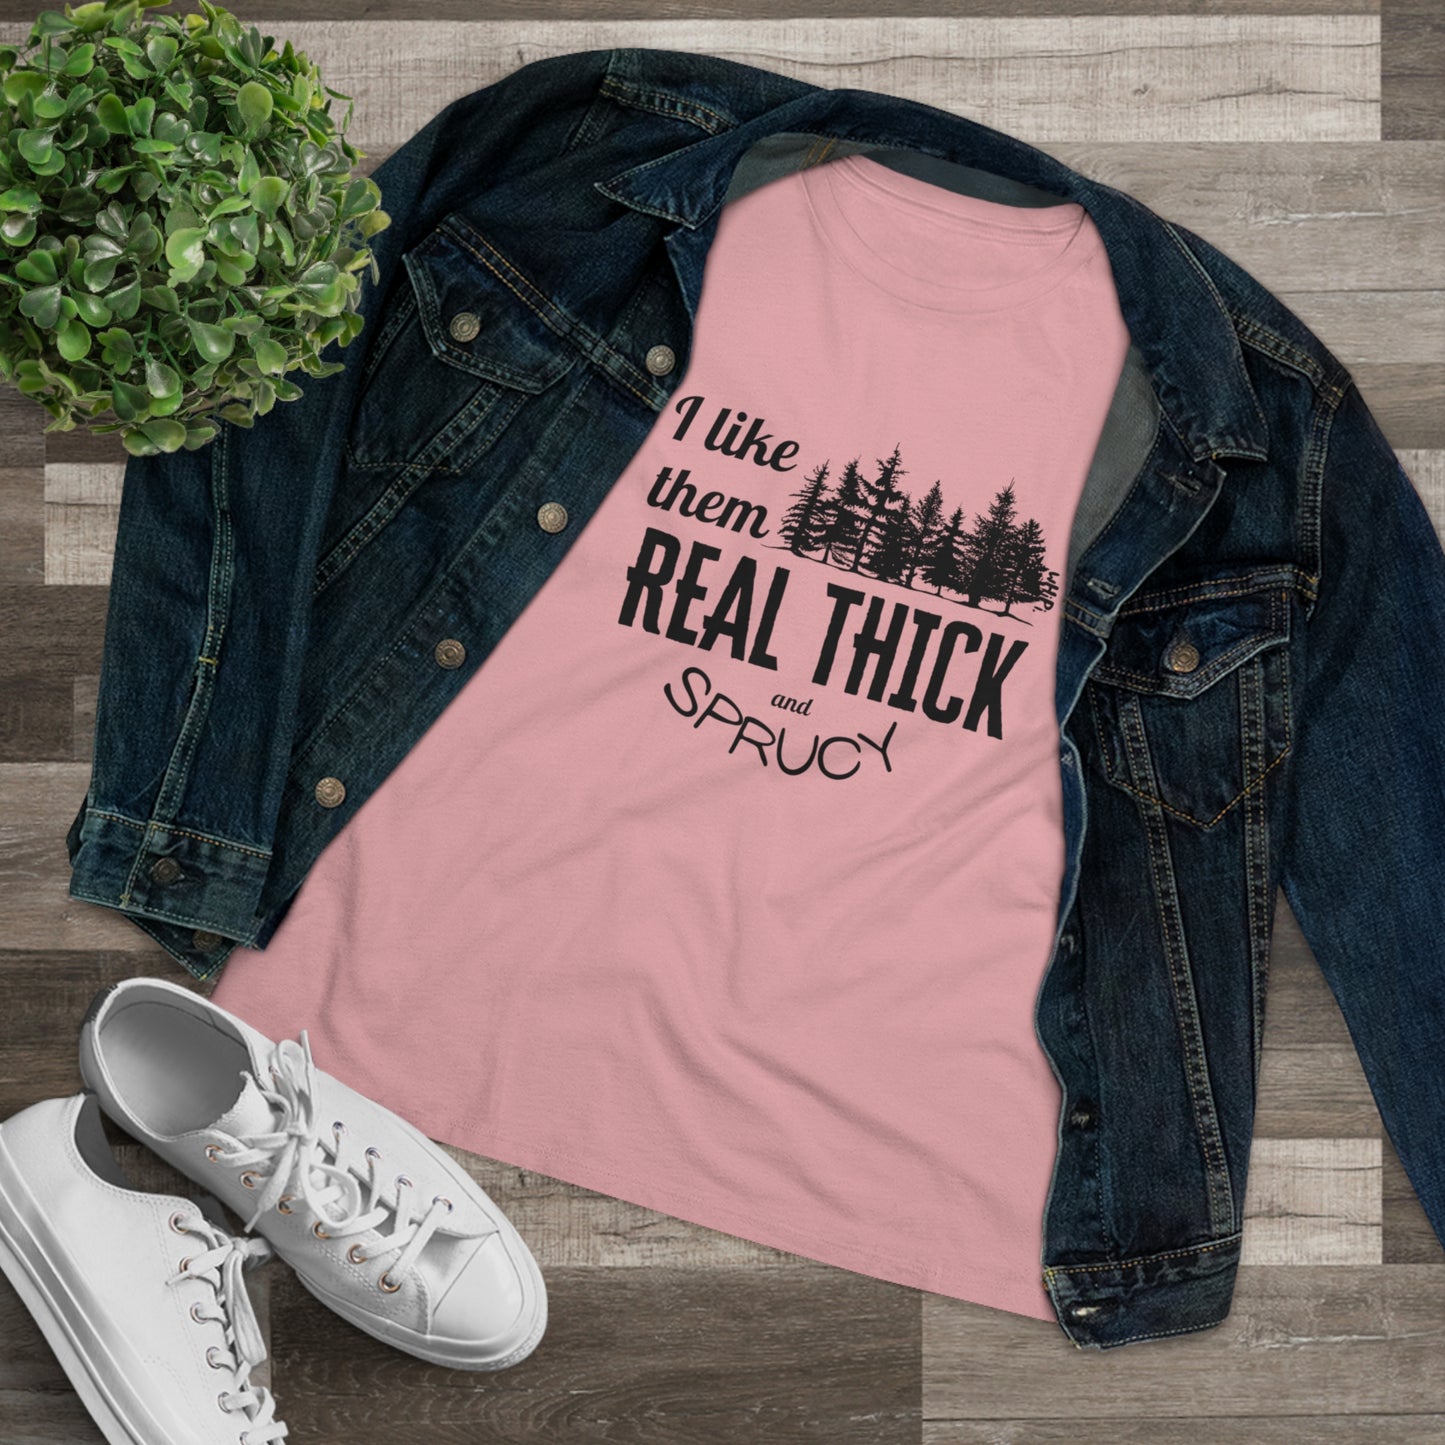 Real Thick and Sprucy Tshirt